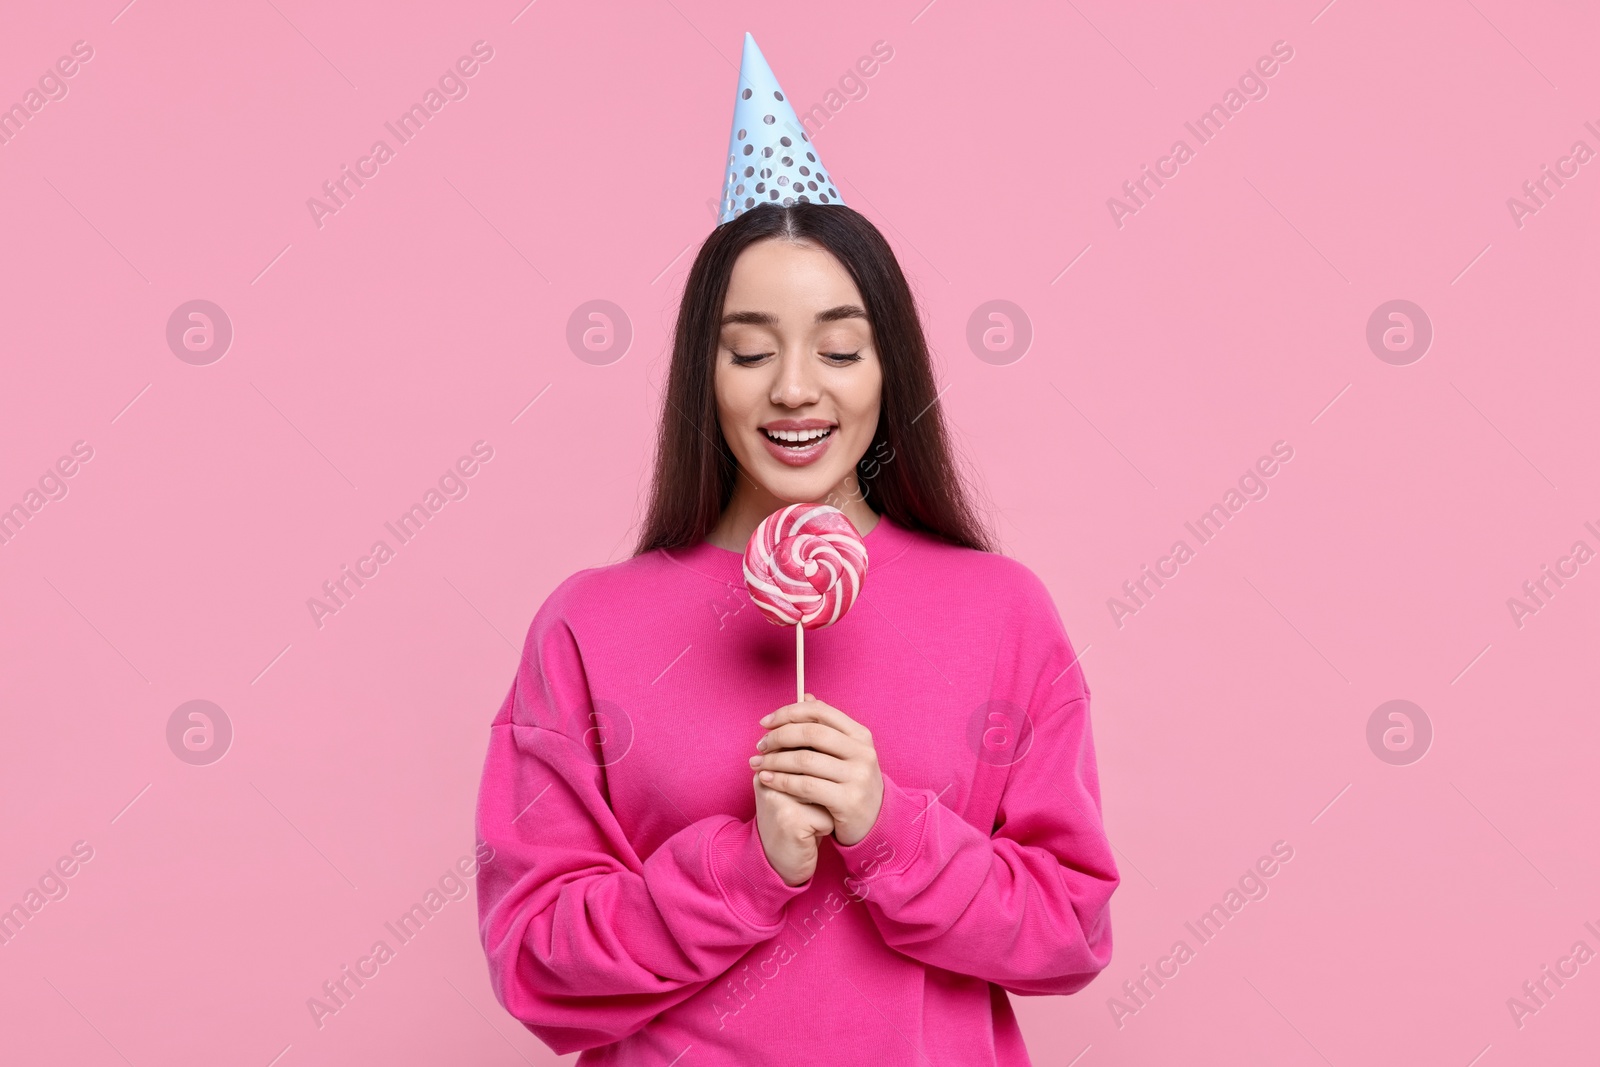 Photo of Woman in party hat holding lollipop on pink background